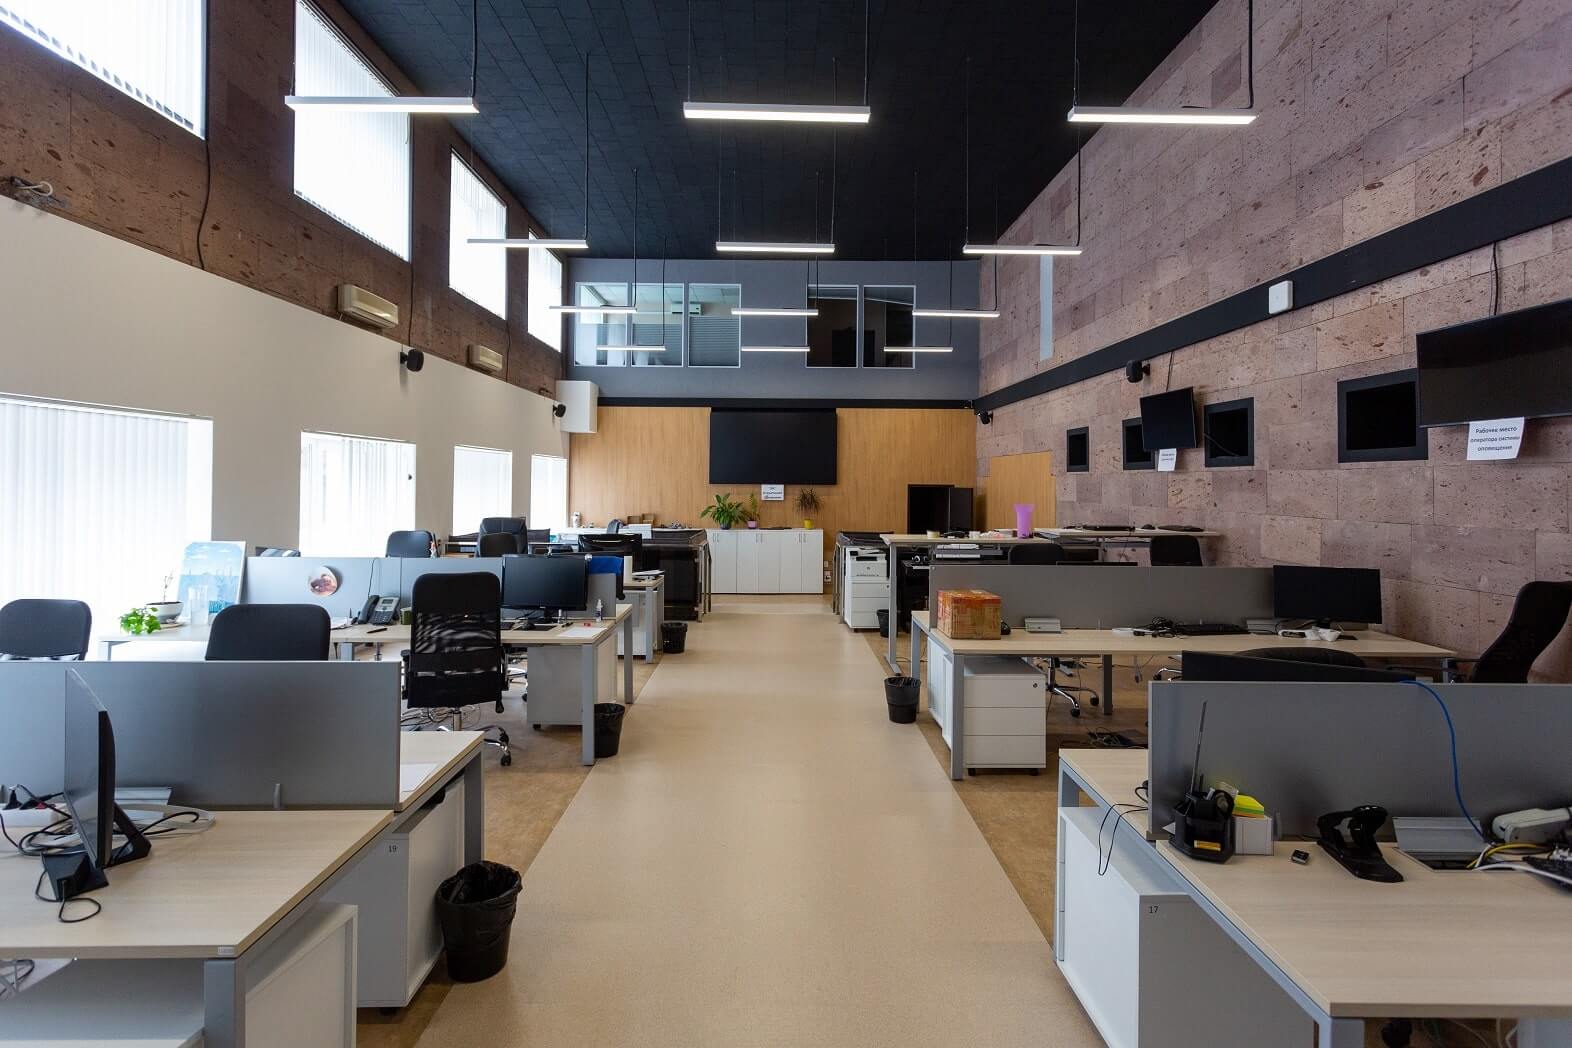 5 Important Things To Consider Before an Office Renovation